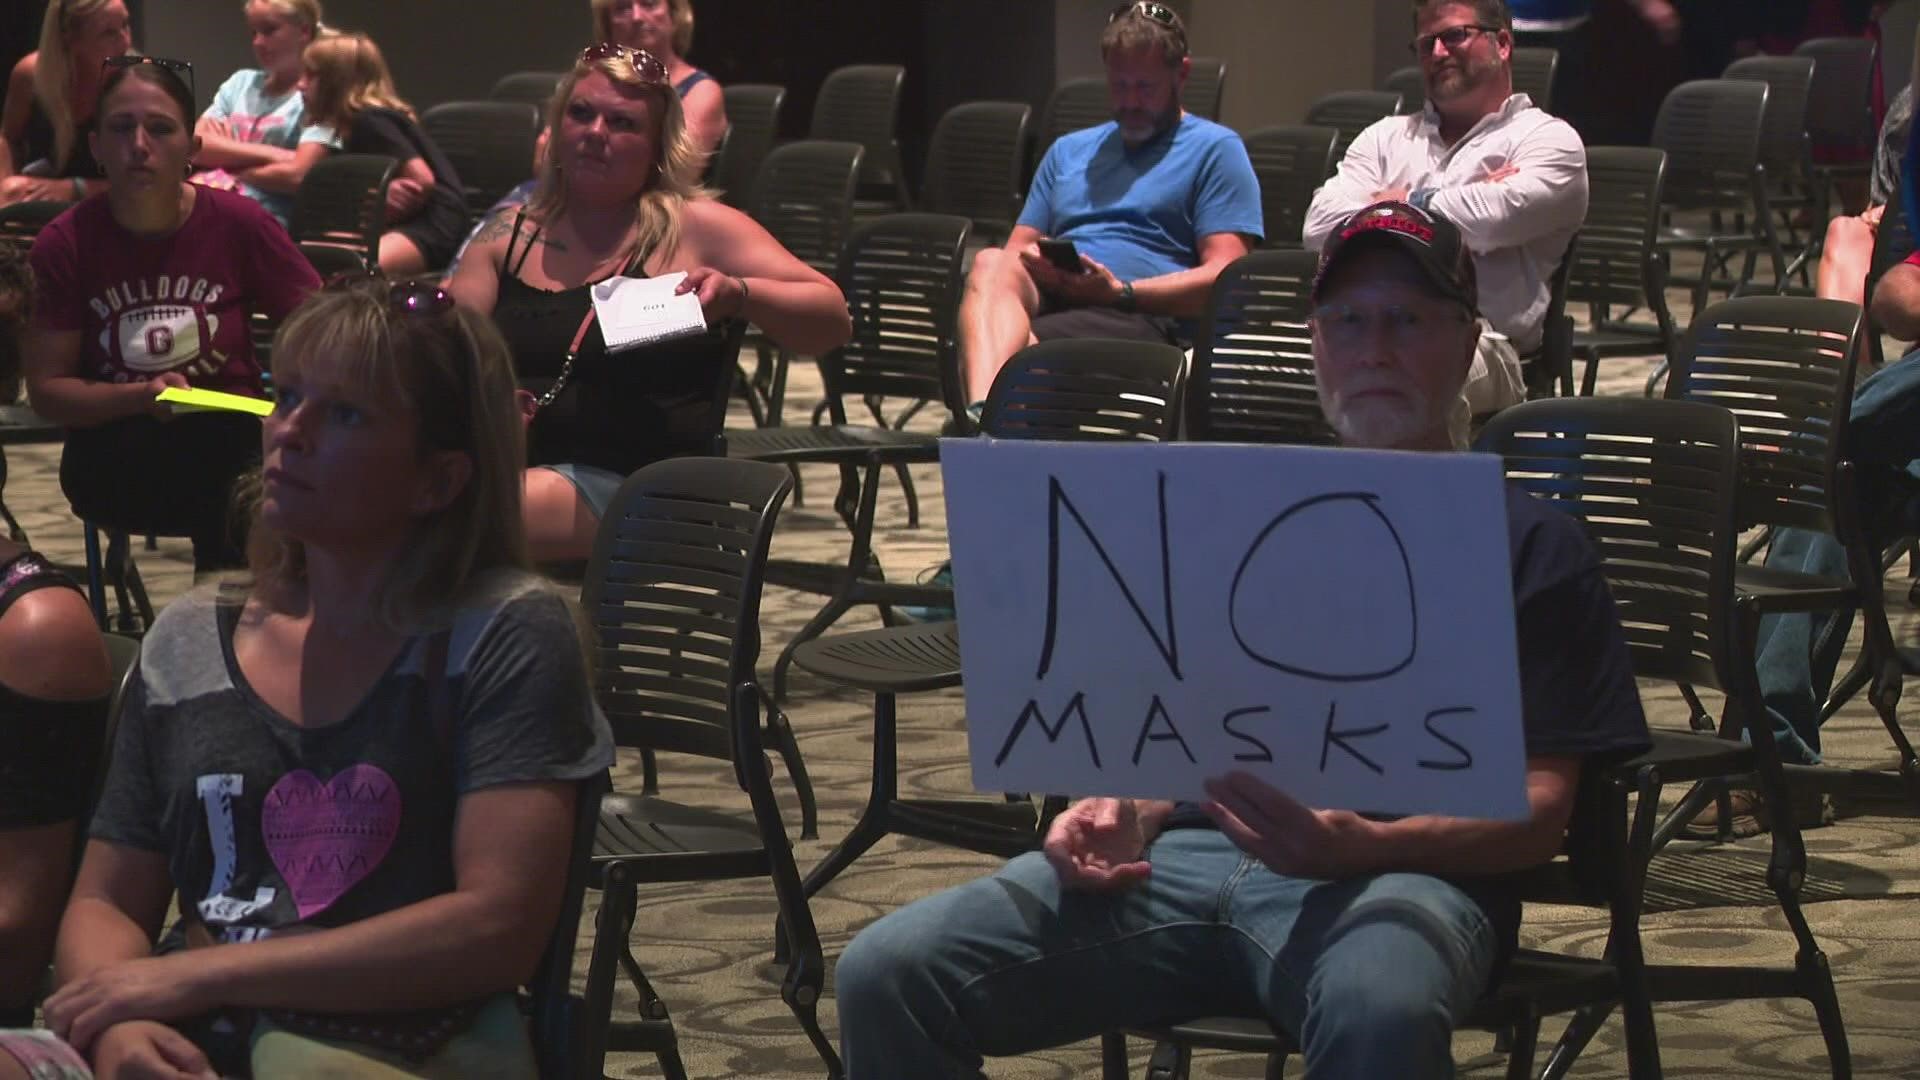 Parents and others gathered at a Kent County Commissioners listening session regarding the mask mandate in schools.